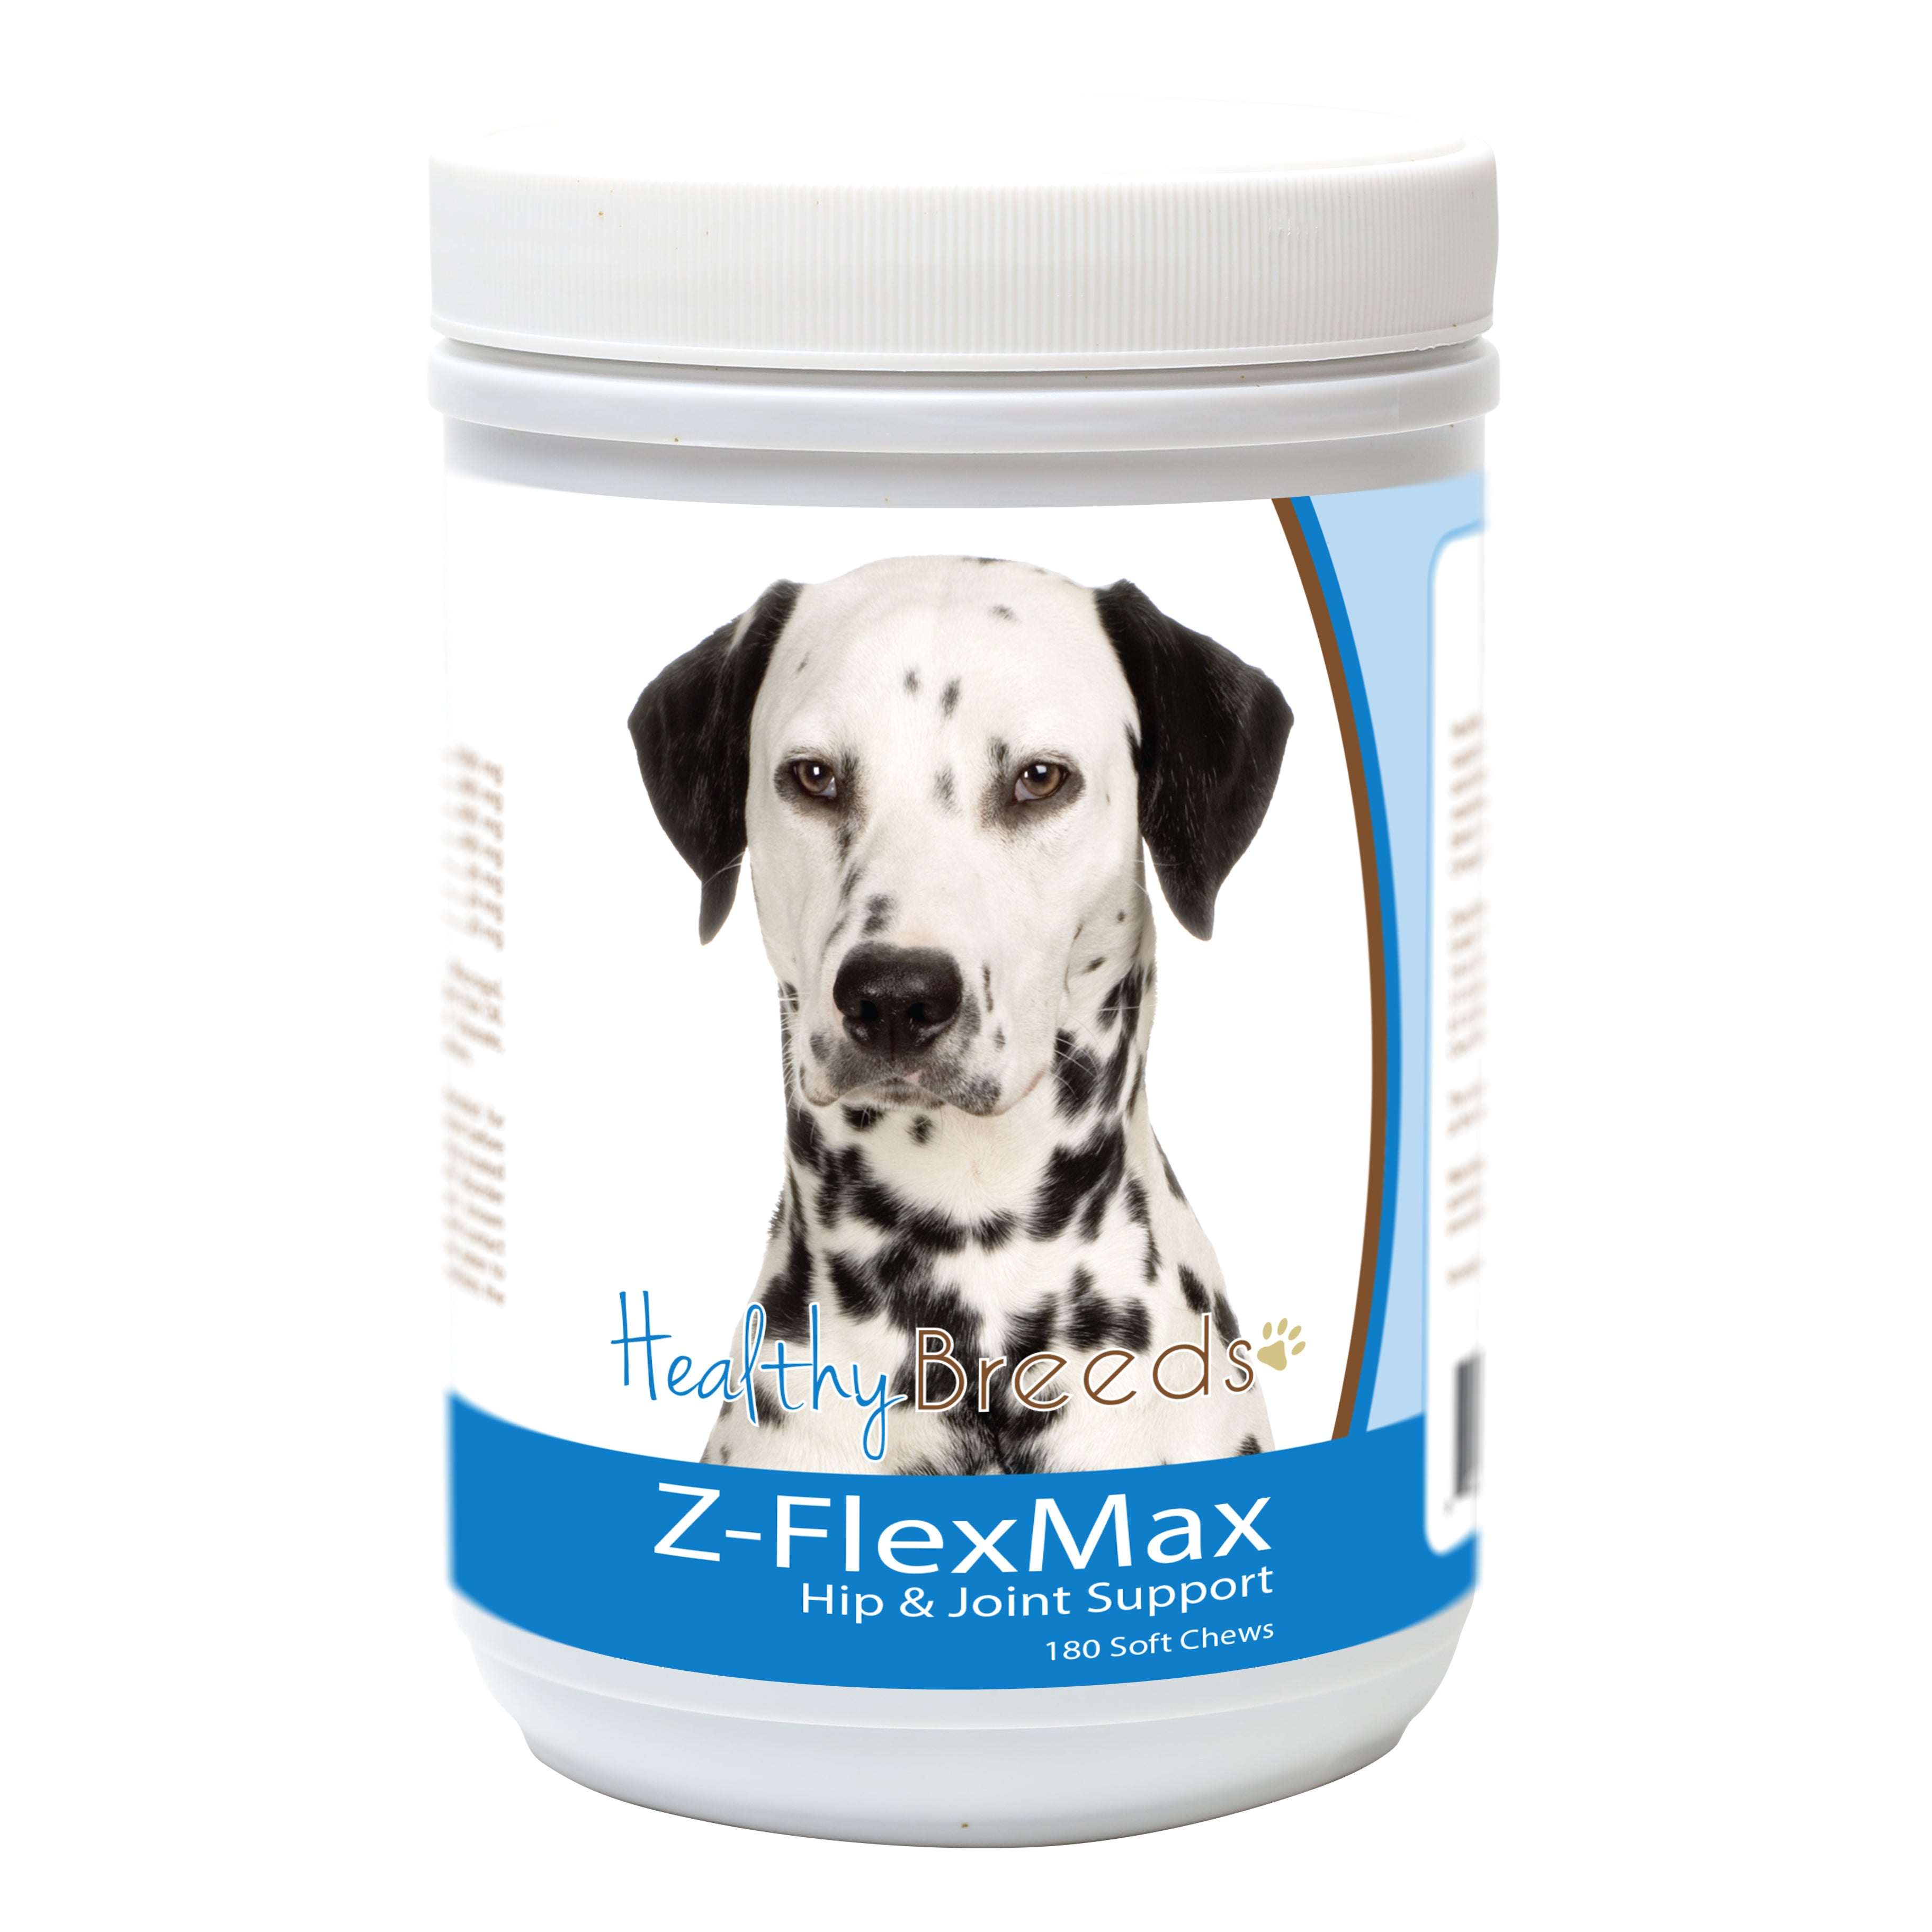 Dalmatian Z-Flex Max Dog Hip and Joint Support 180 Count